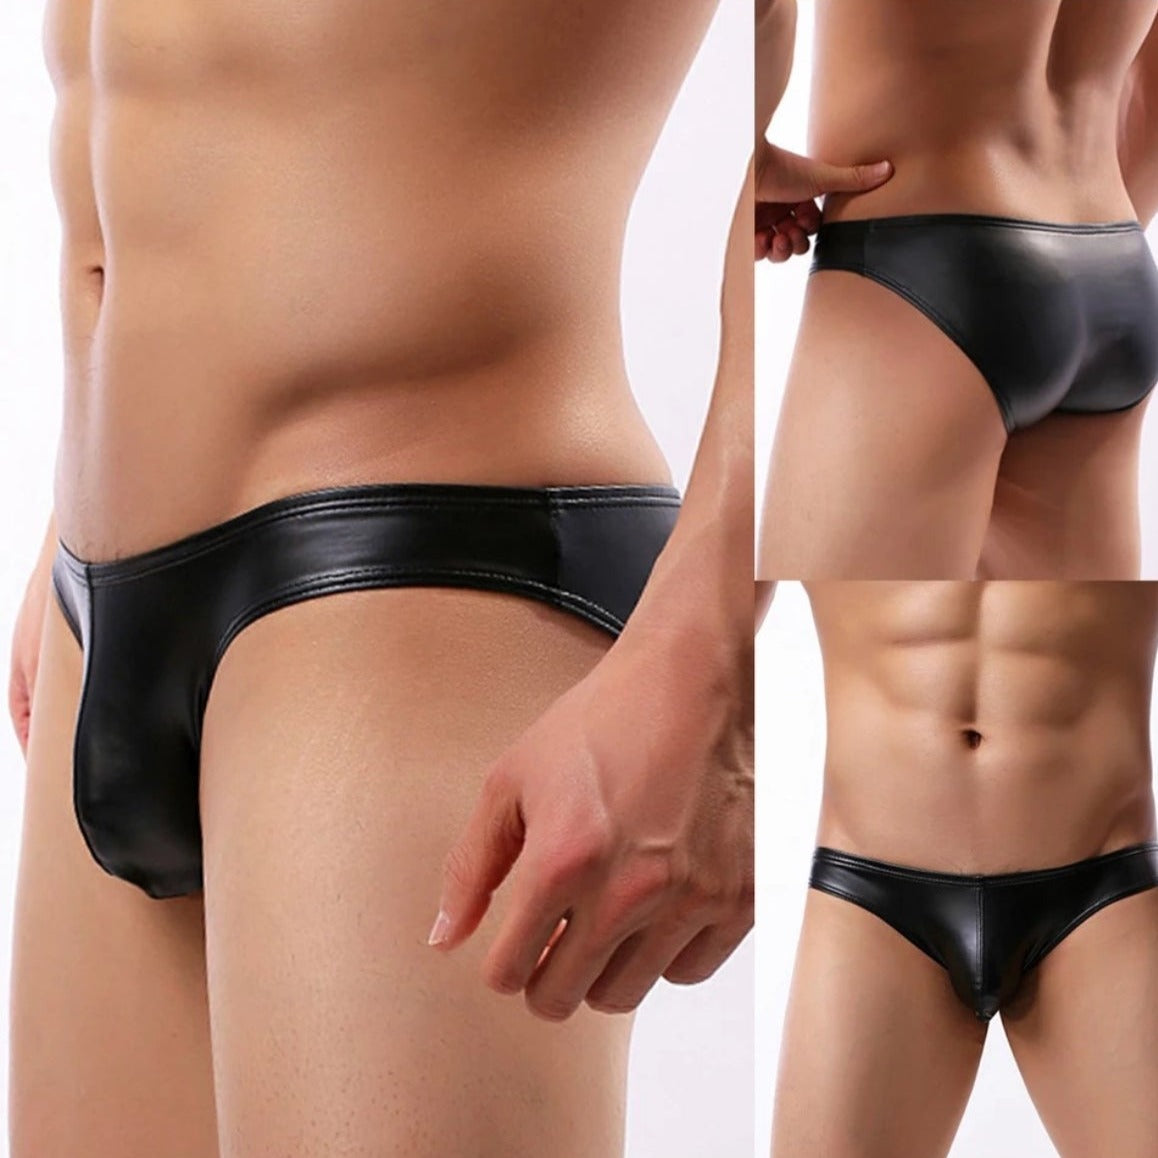 Black shiny and sexy rubber briefs, shorts or swimming trunks